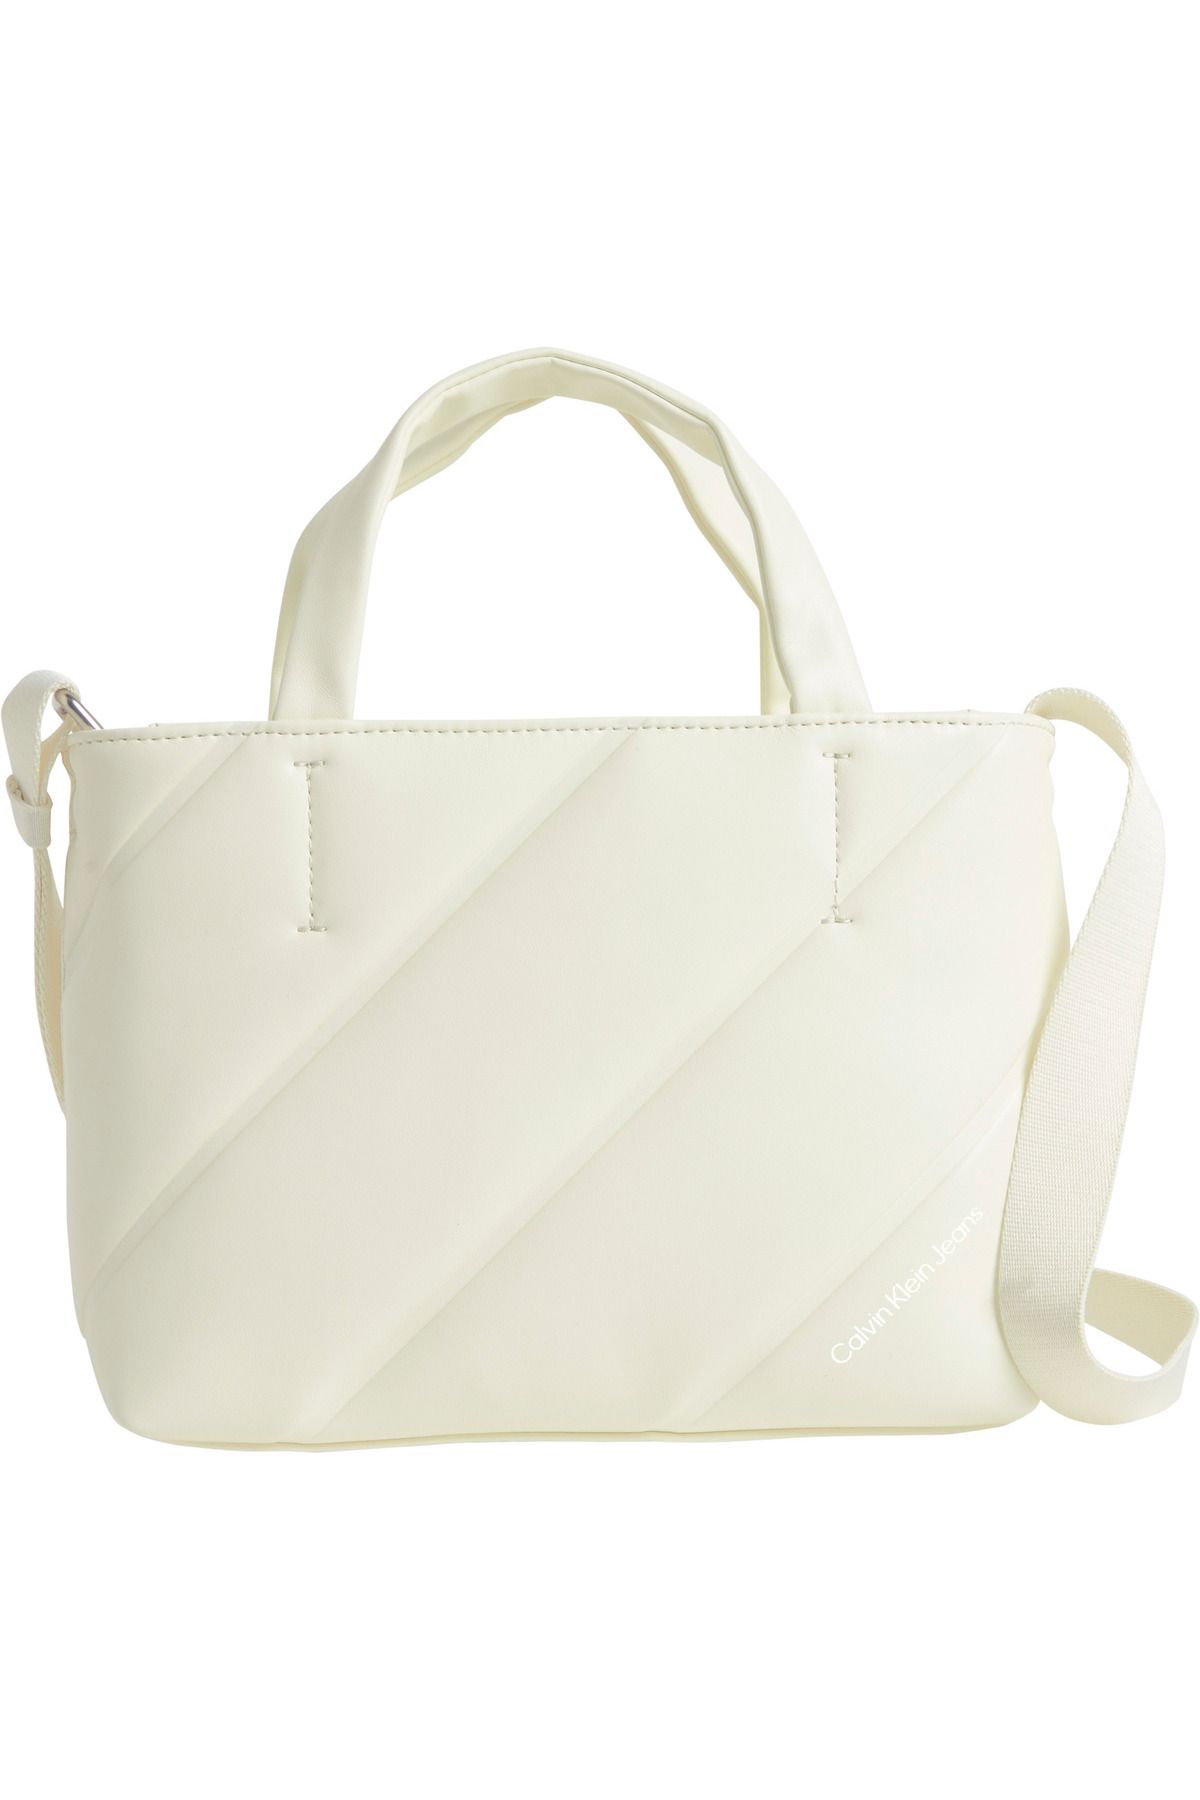 Calvin Klein QUILTED MICRO EW TOTE22